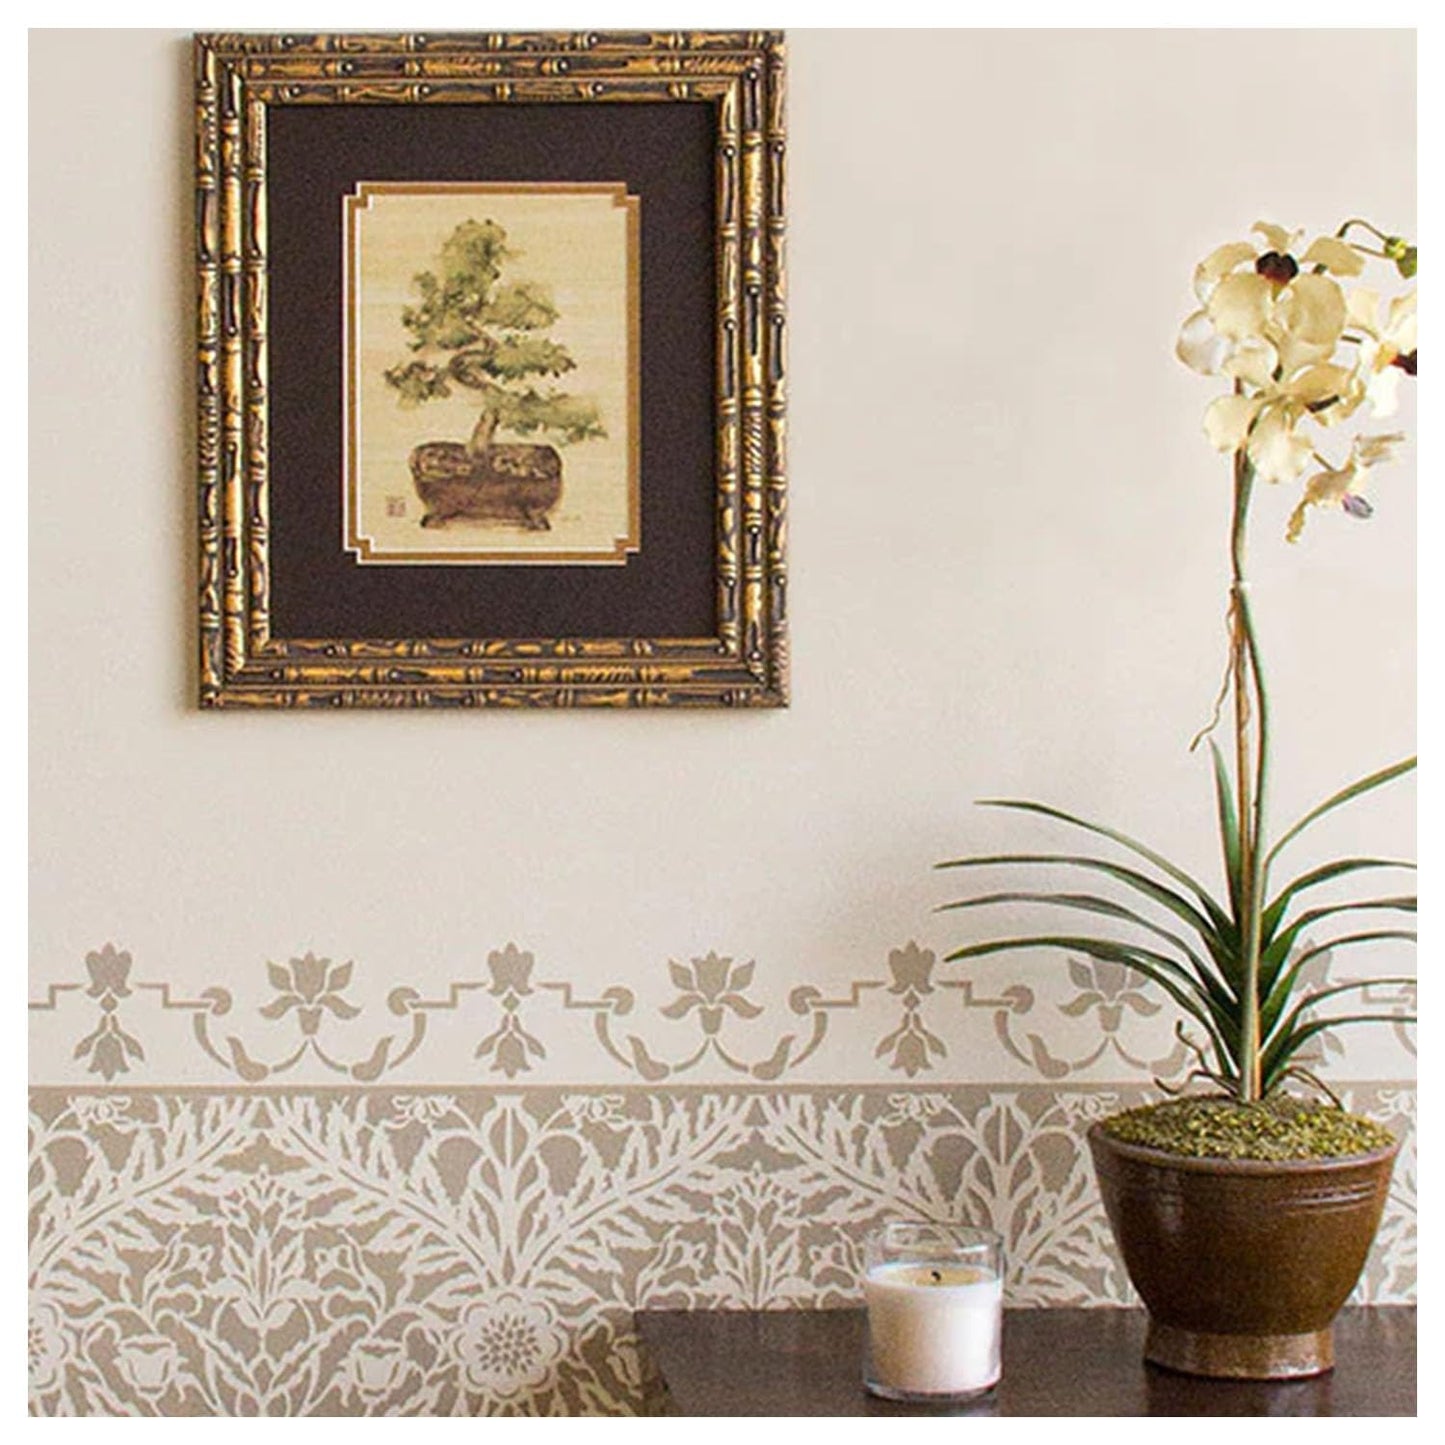 Latest Greek Lotus Border Wall and Floor Stencil -Pack of 1, Sheet Size 05 x 23 inch/Design Size 3.5 x 21 inch.